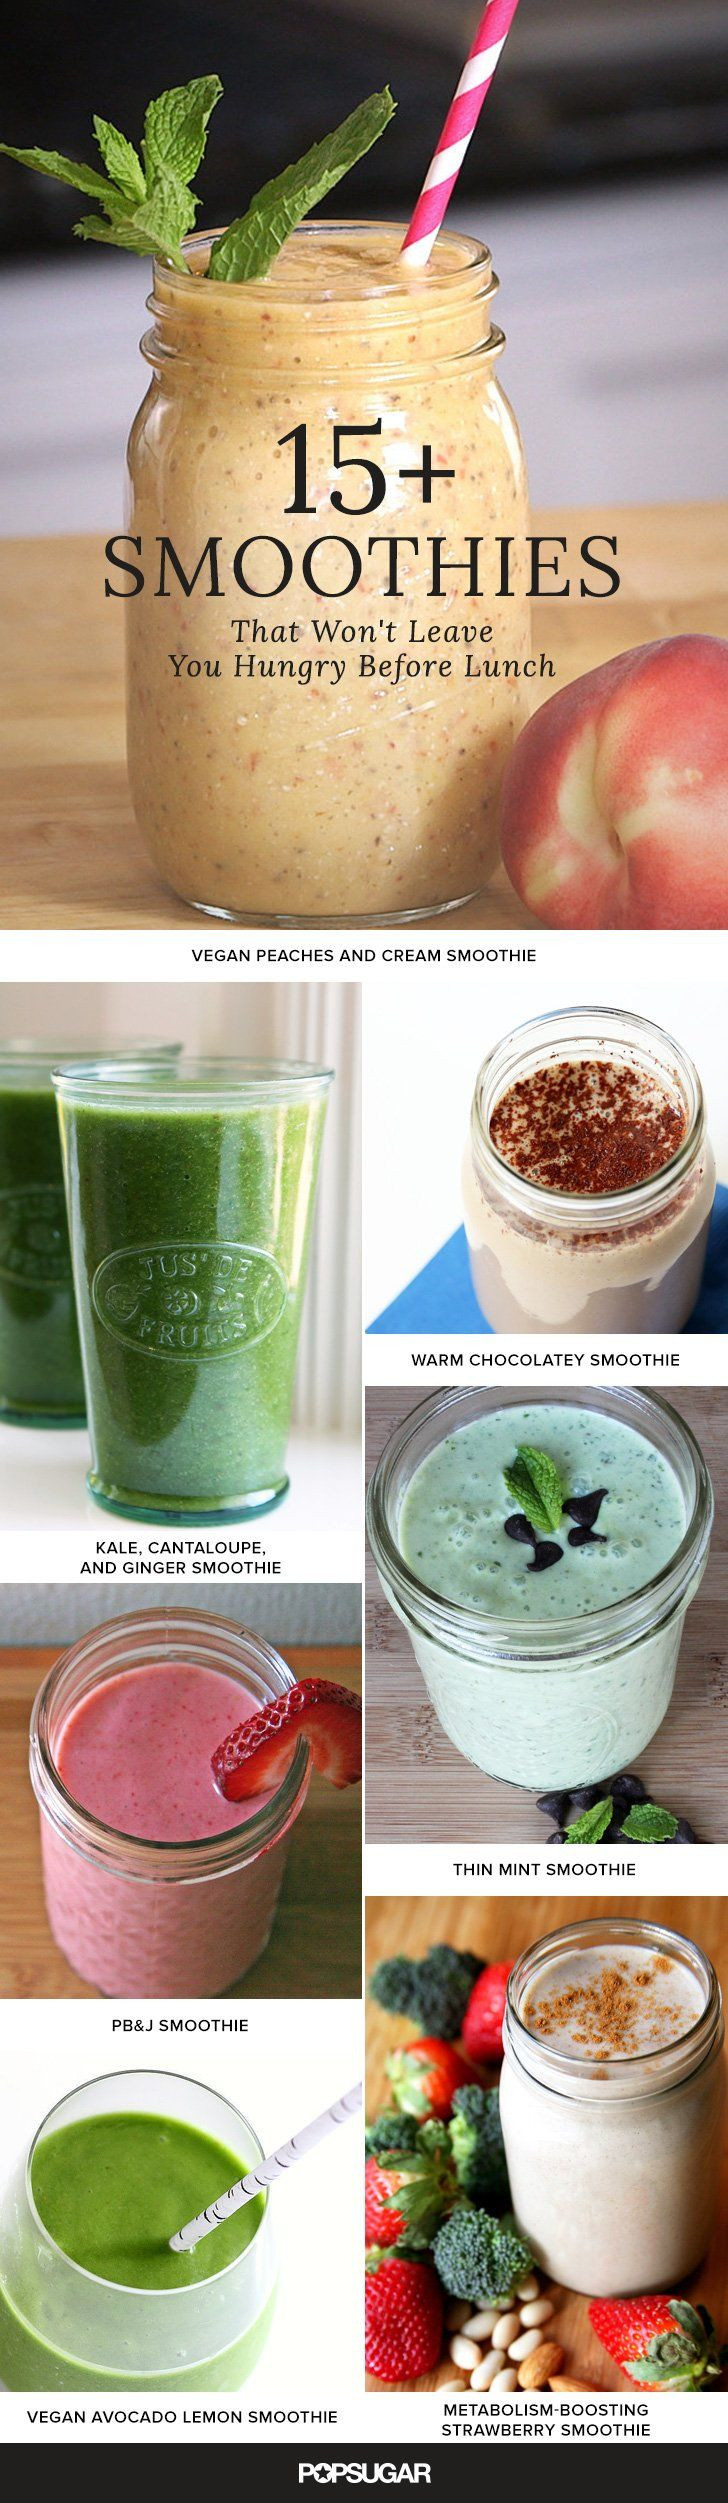 Healthy Filling Smoothies
 Best 25 Breakfast smoothies ideas on Pinterest